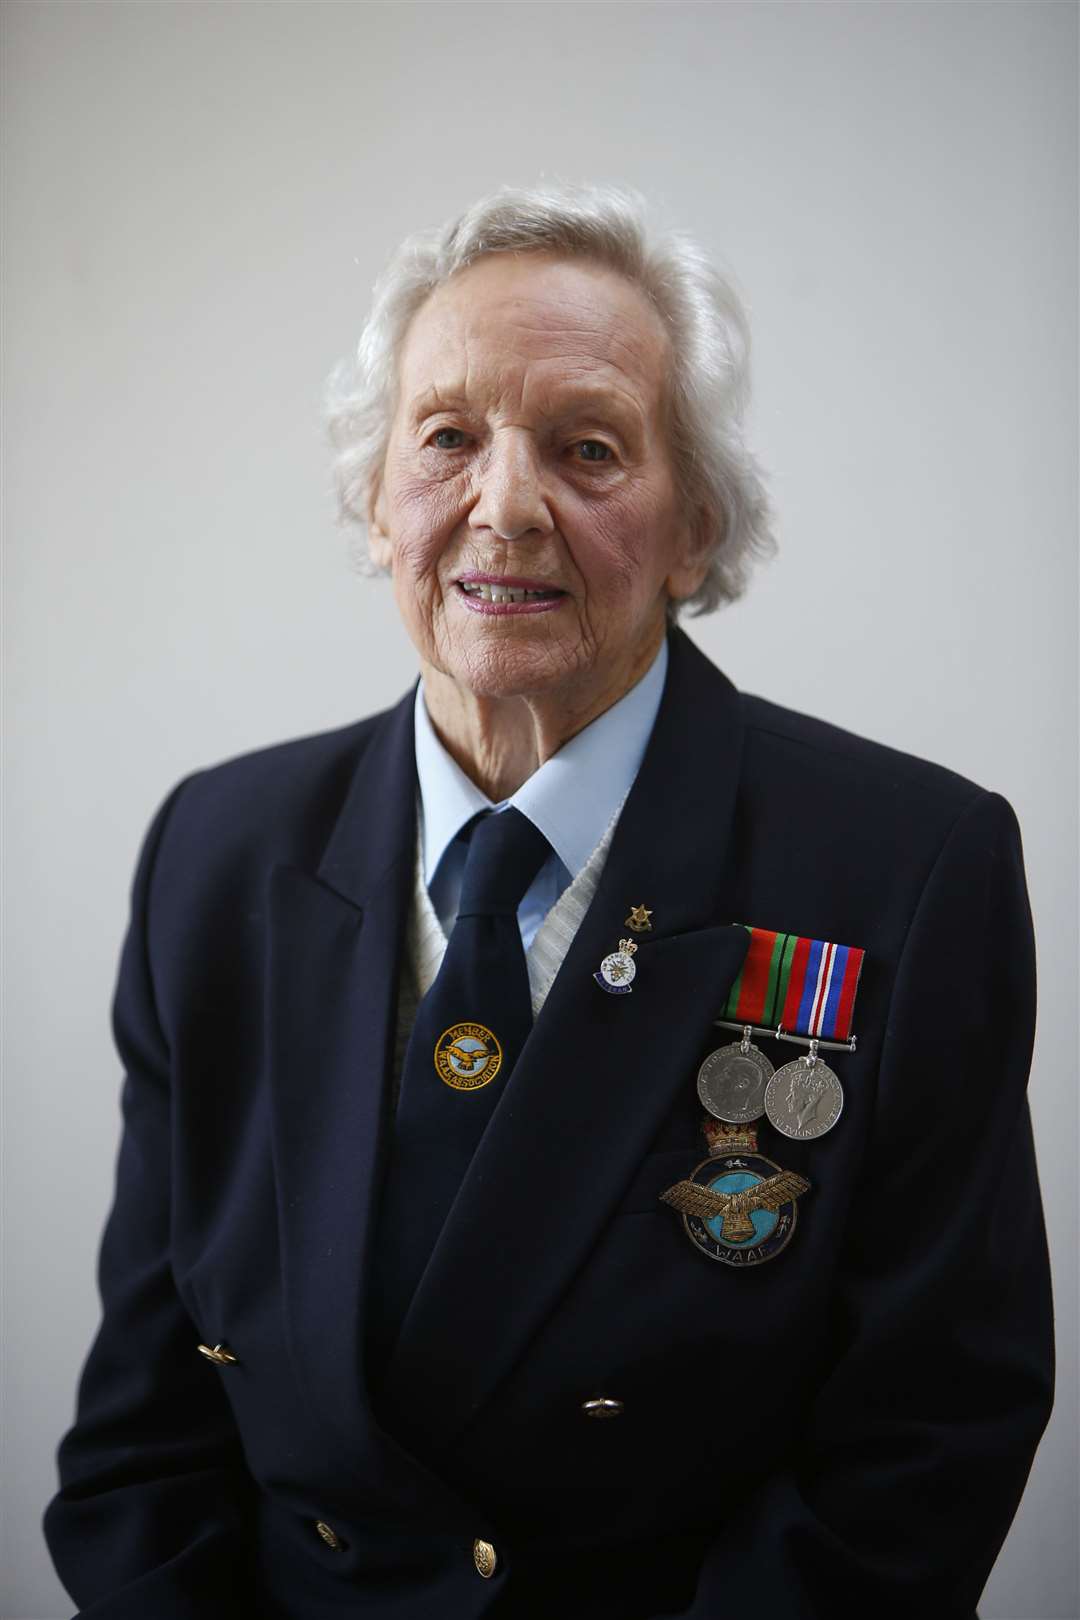 Iris Sheppard at 96-years-old. Picture: Andy Jones